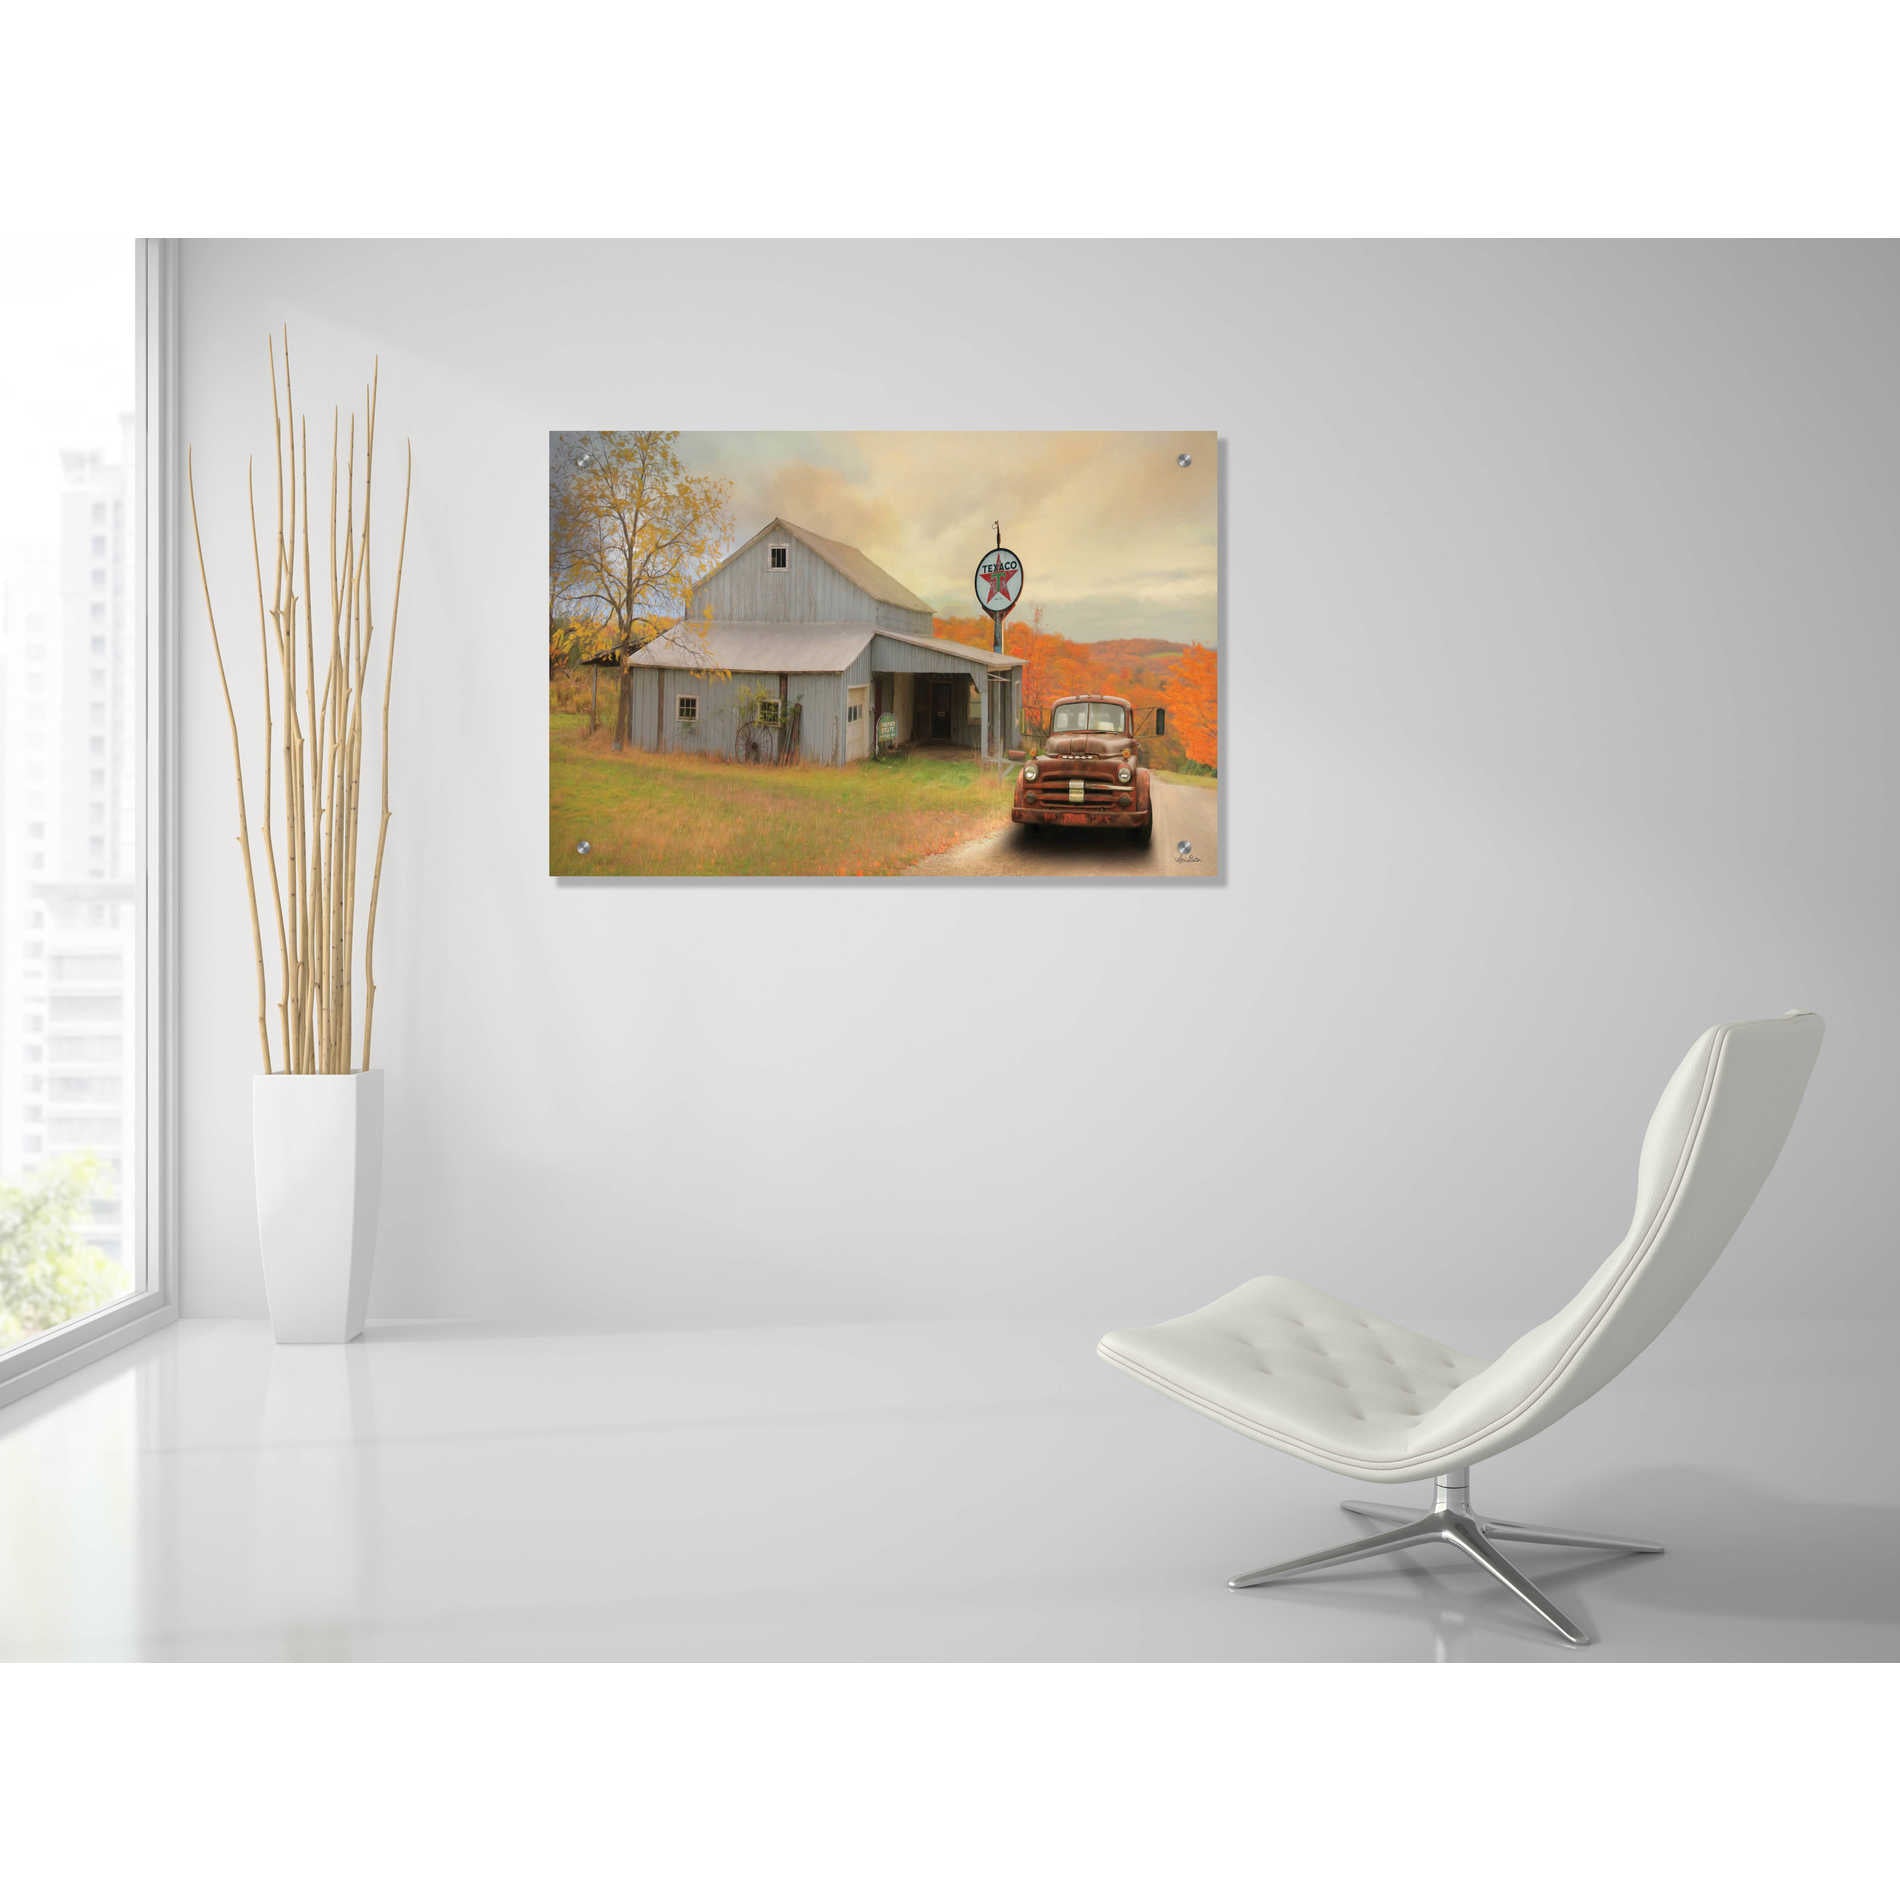 Epic Art 'The Old Station' by Lori Deiter, Acrylic Glass Wall Art,36x24